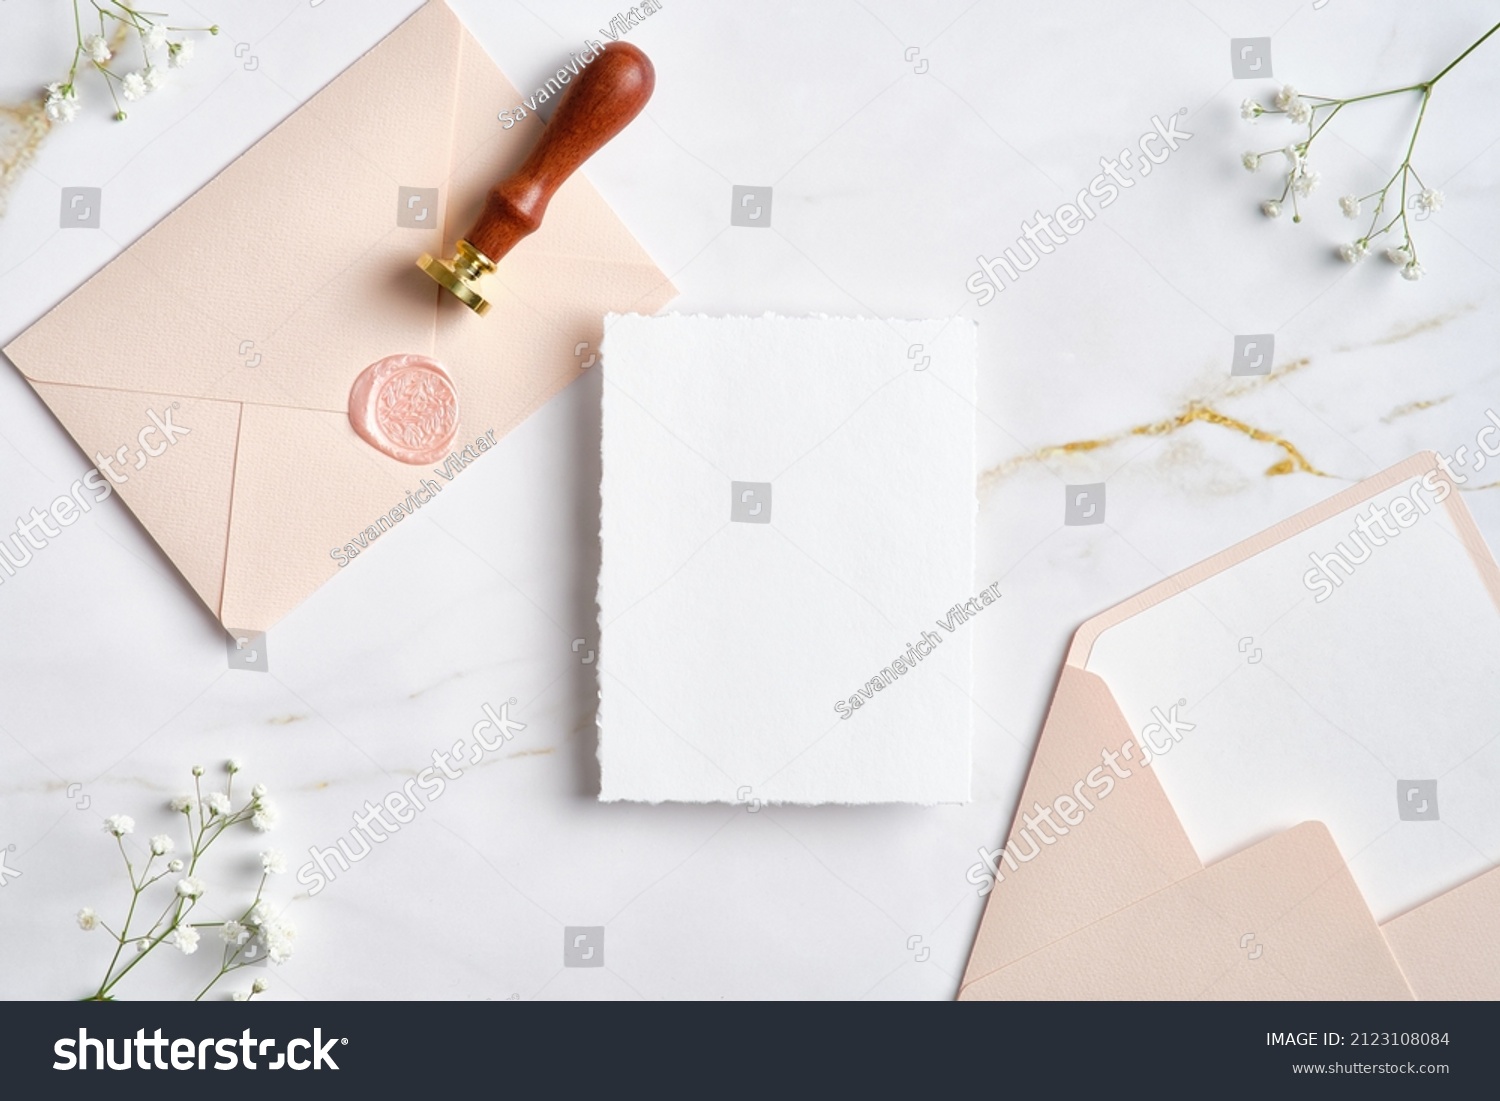 Wedding stationery set on marble desk top view. Blank paper card mockup, pastel pink envelopes with wax seal stamp, gypsophila flowers. #2123108084